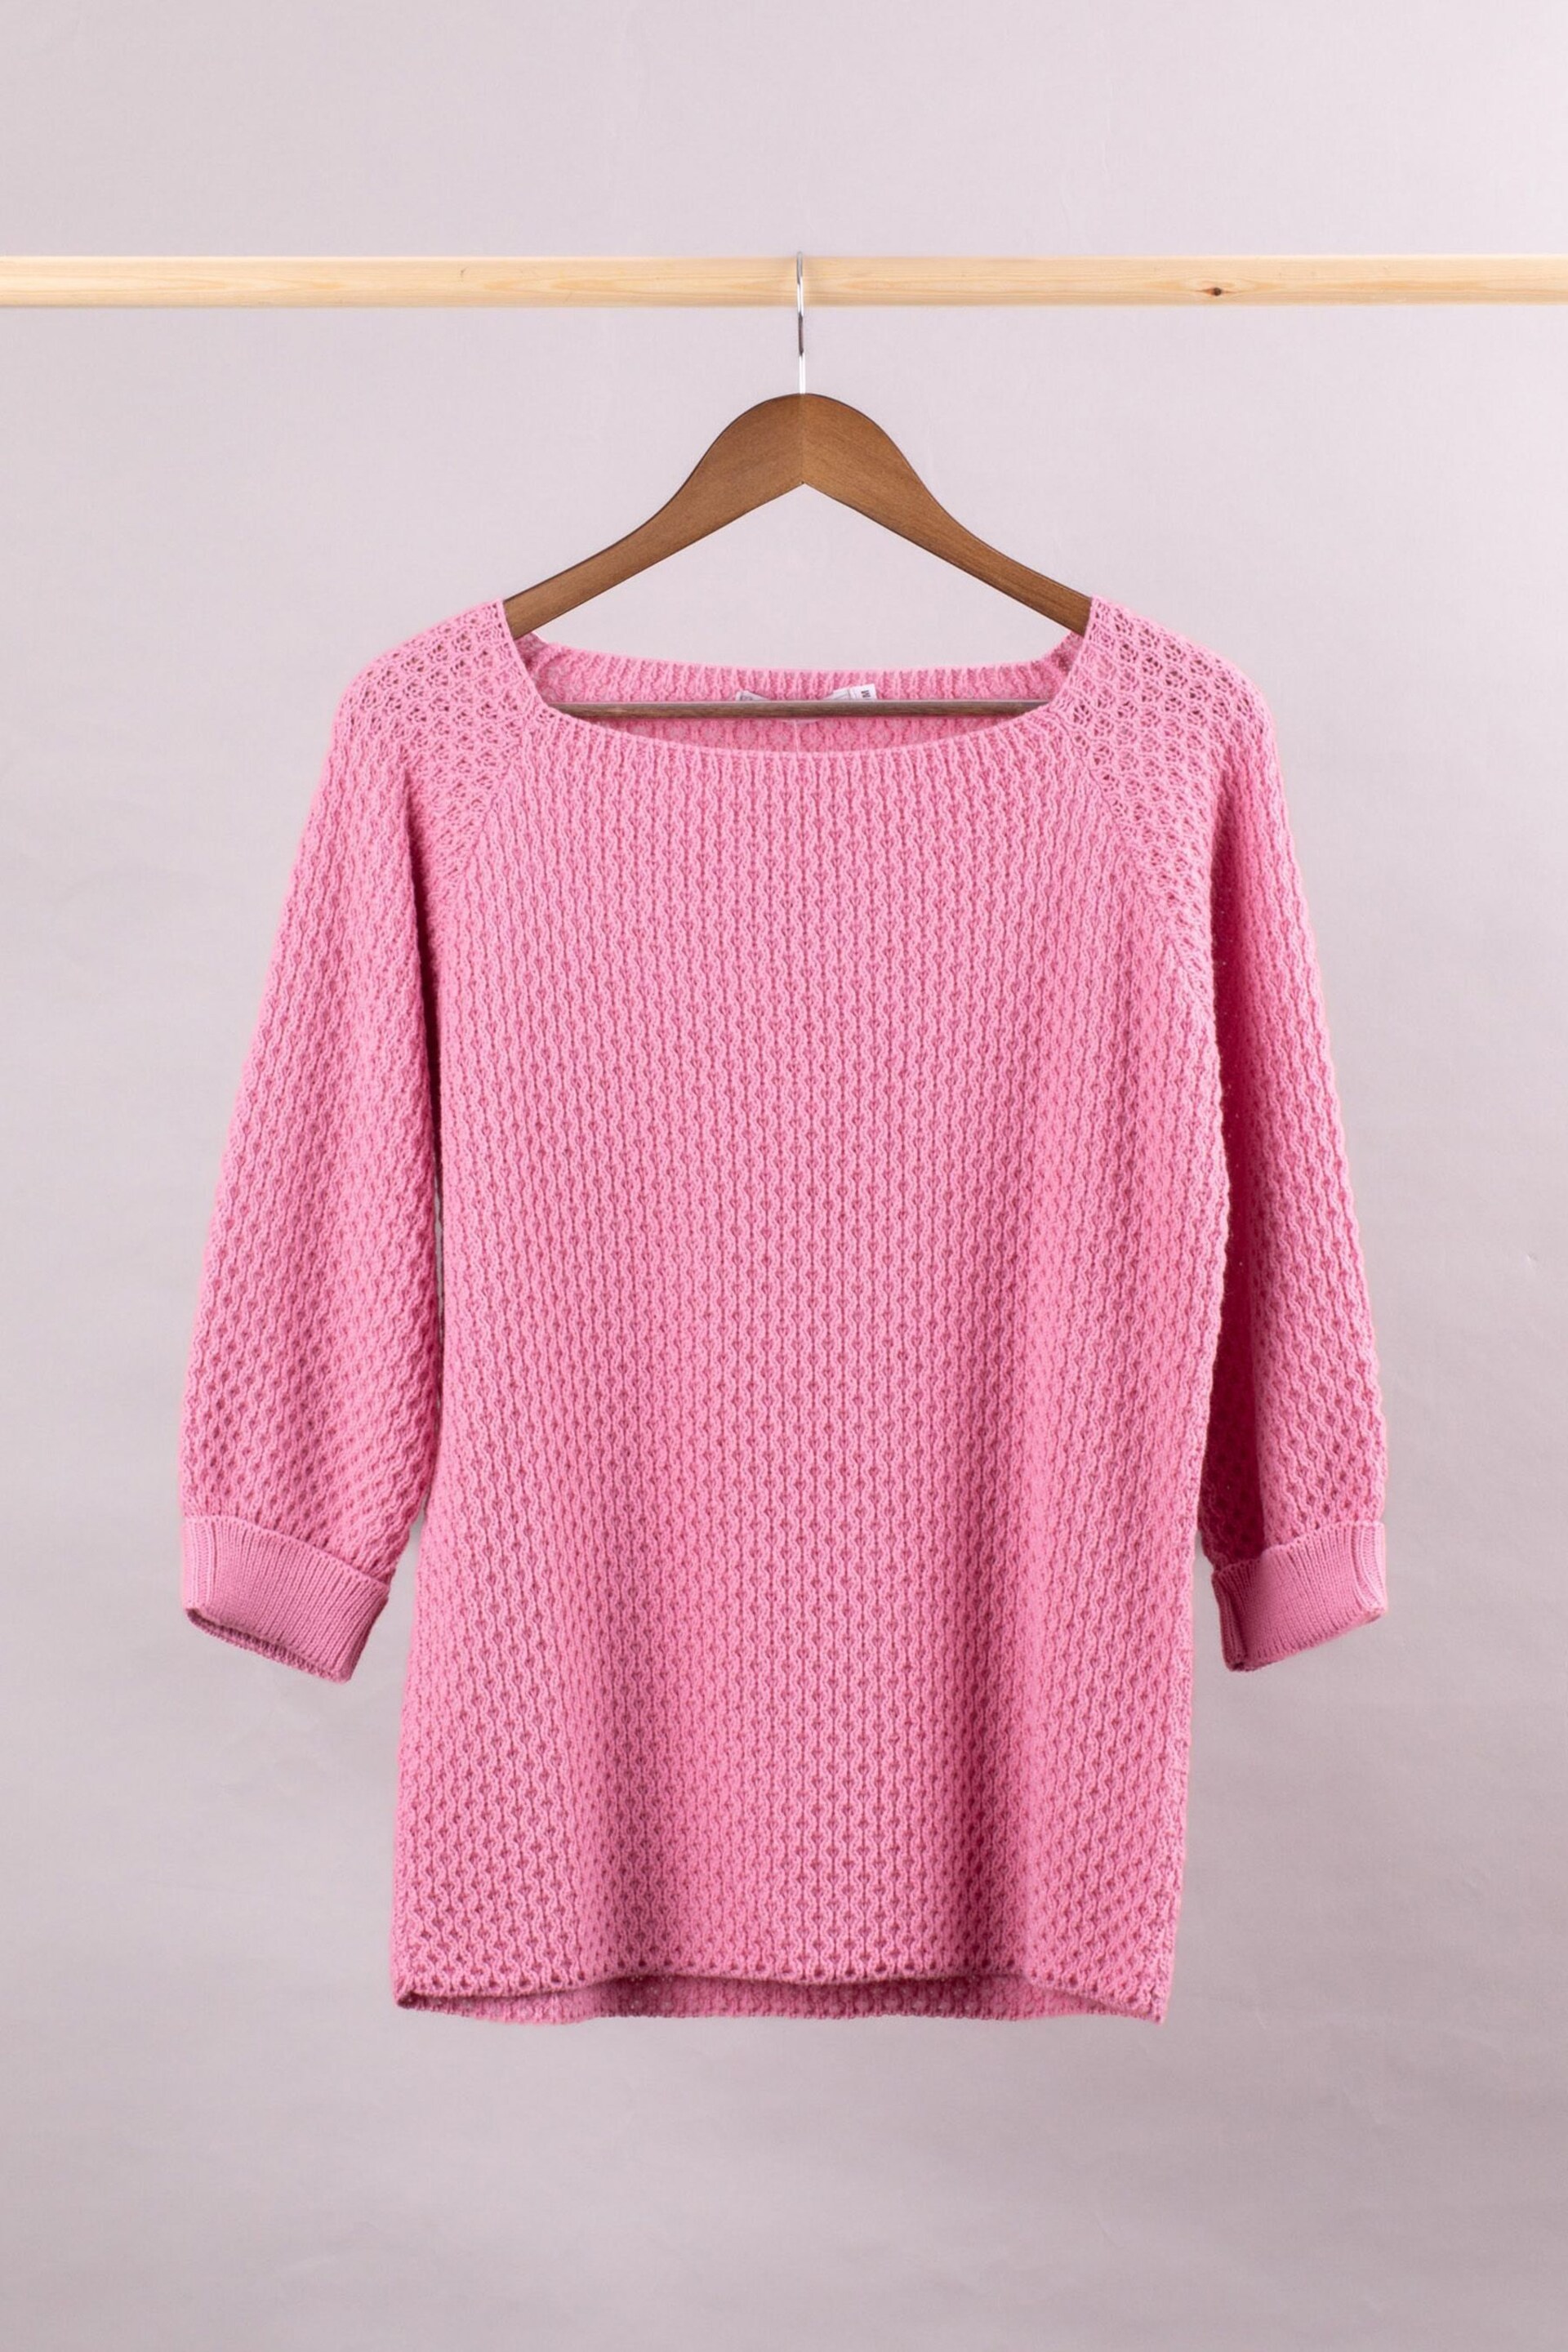 Lakeland Clothing Pink Maisie Relaxed Jumper - Image 1 of 3